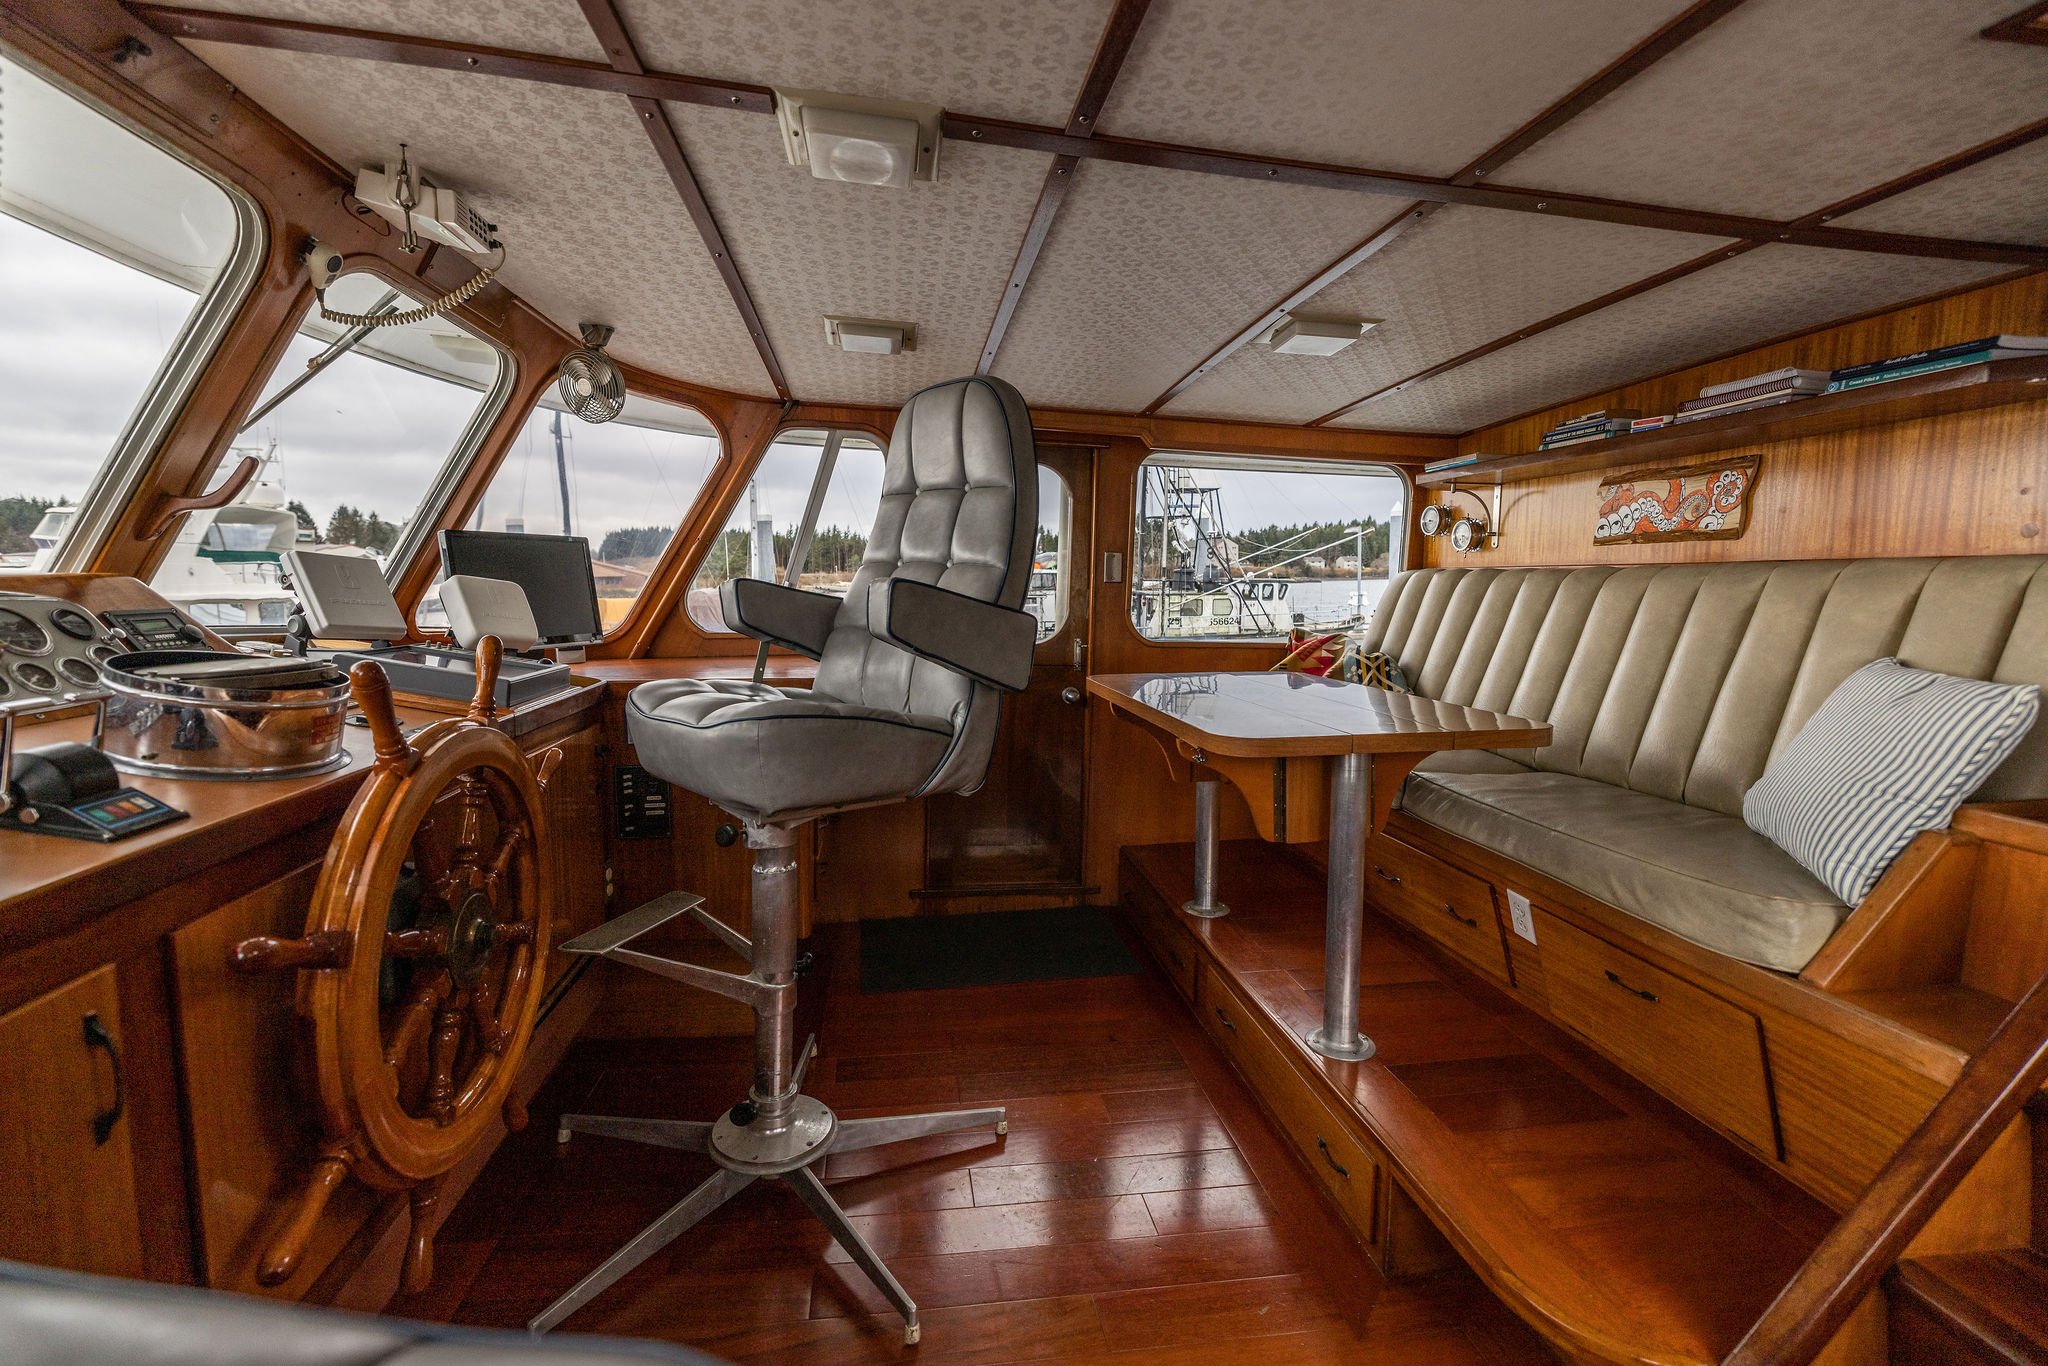 Wheelhouse with settee, captains chair and ships wheel.